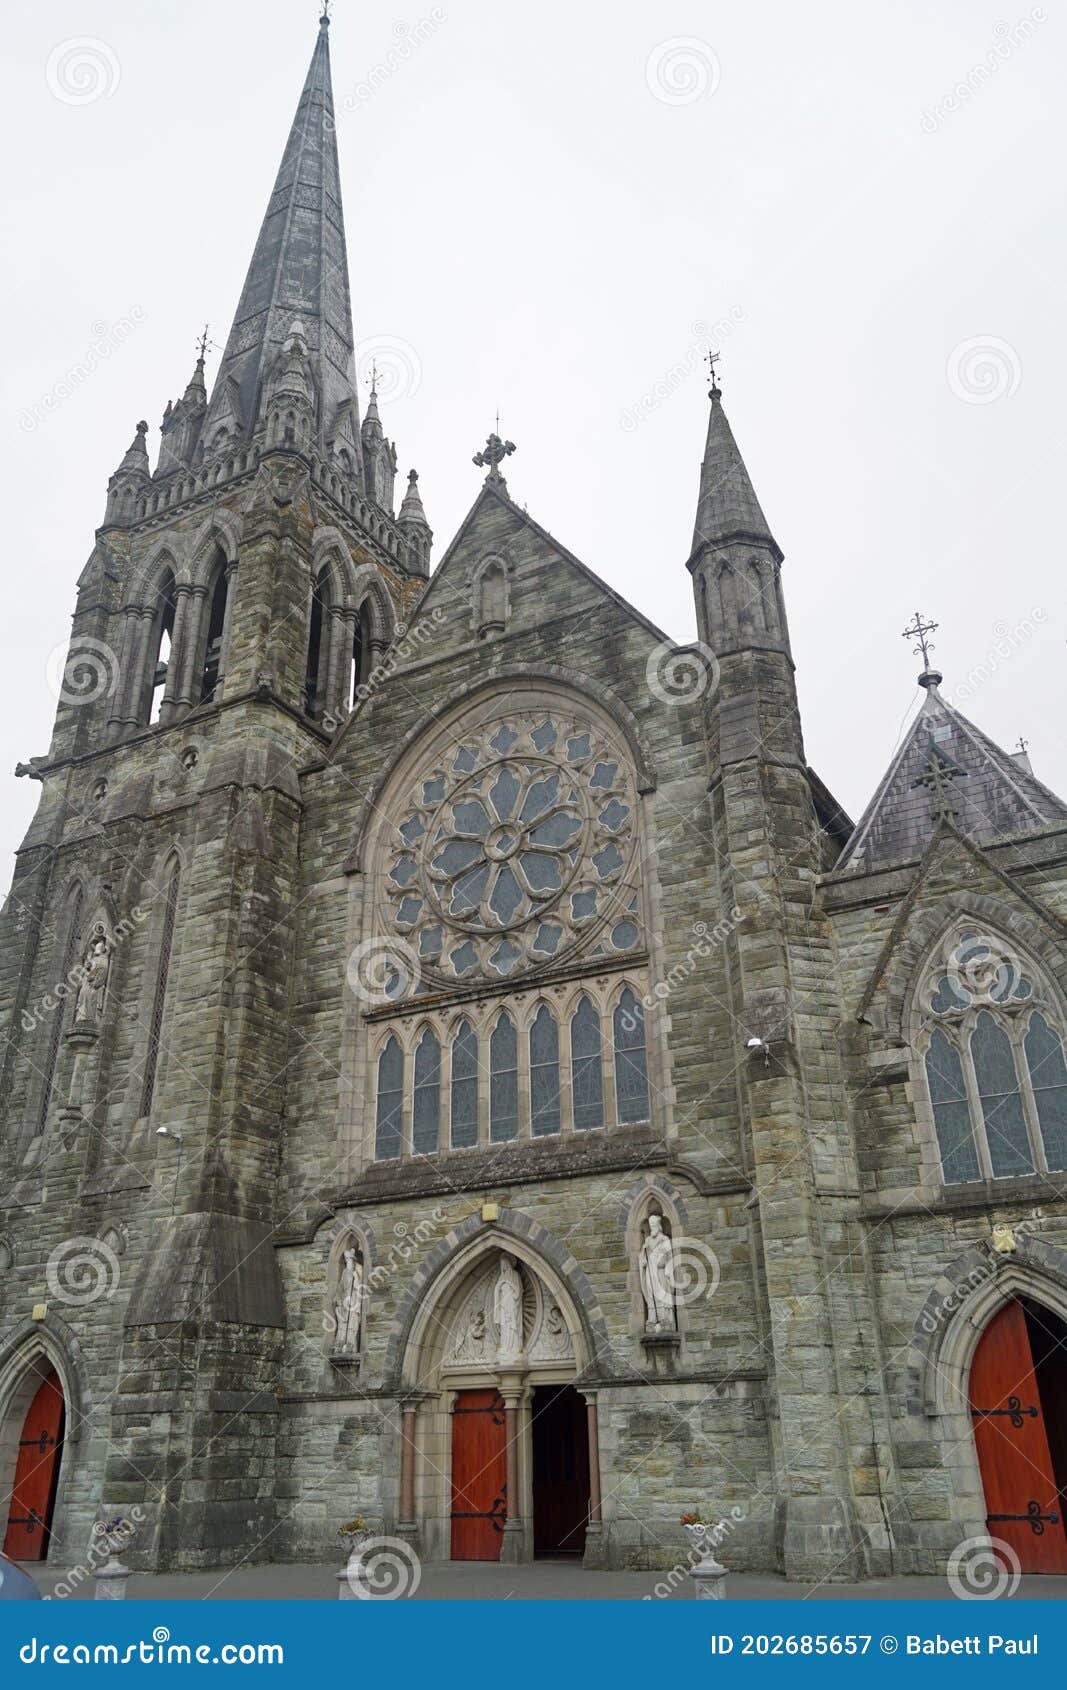 Clonakilty Photos - Free & Royalty-Free Stock Photos From Dreamstime